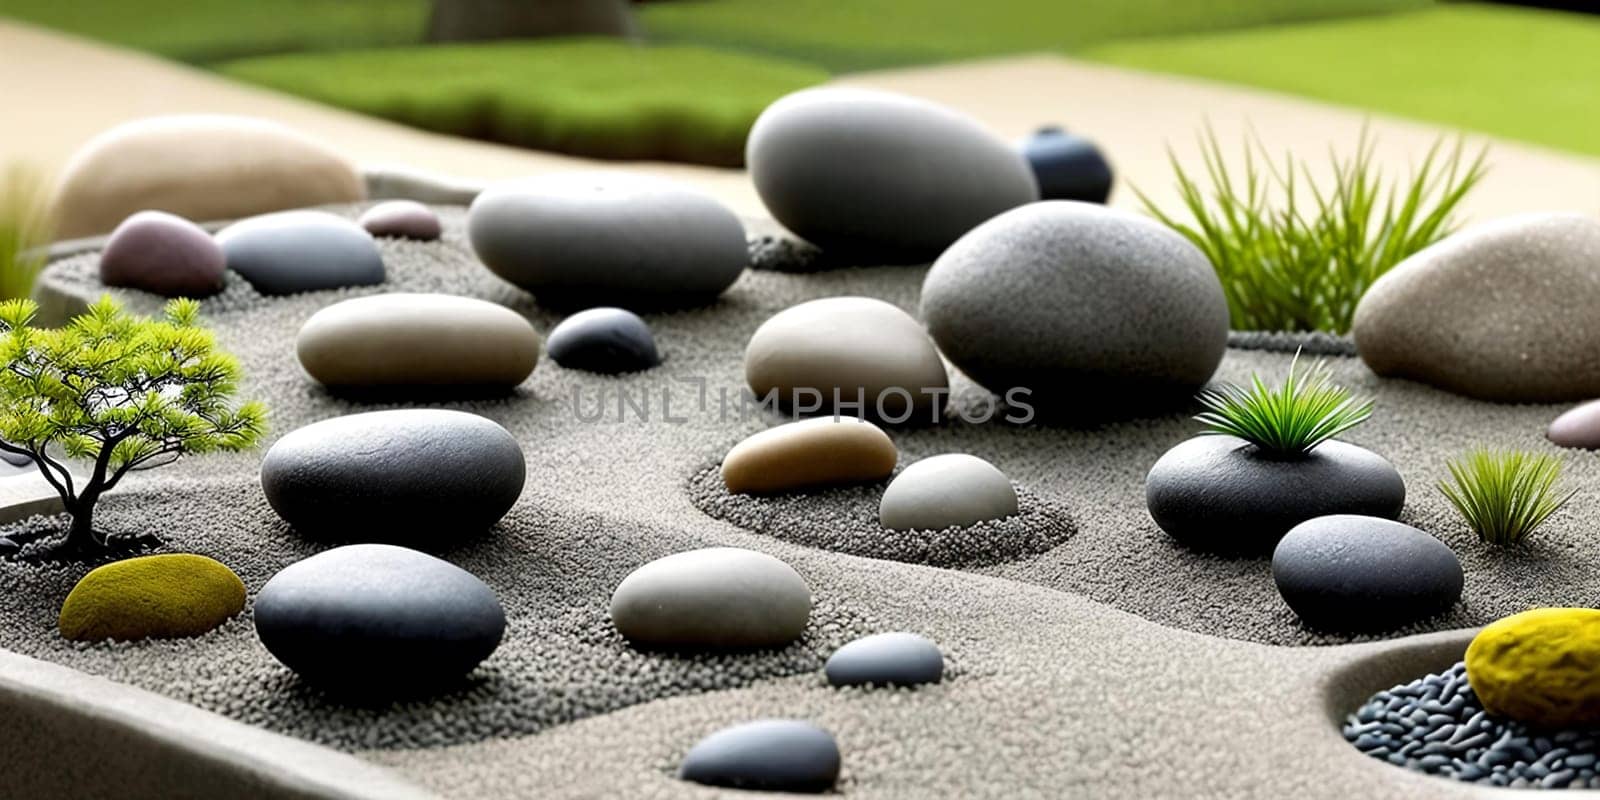 Mindfulness Moment. Capture the essence of mindfulness and meditation by photographing a zen garden with carefully arranged pebbles, a miniature bonsai tree, and a tranquil water fountain to evoke a sense of peace and balance.